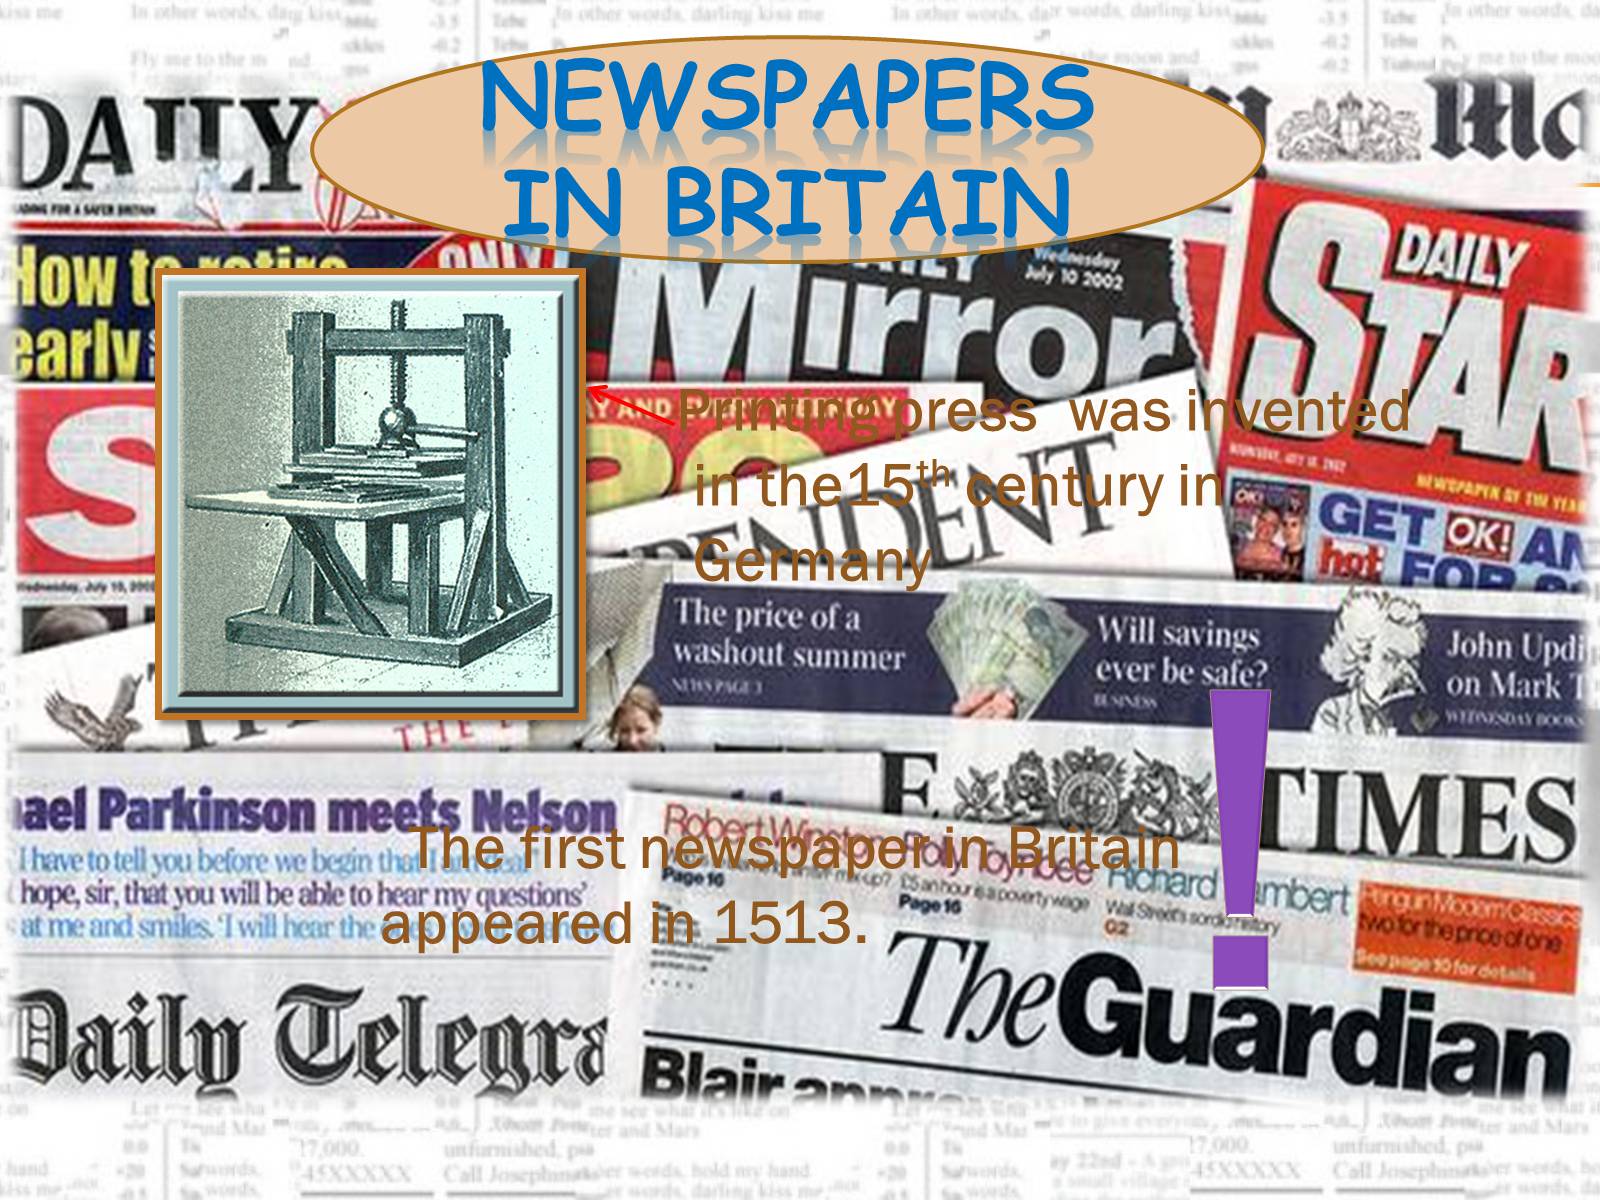 First newspapers. Newspapers in Britain. Презентация на тему newspapers. Mass Media презентация. Mass Media newspapers.